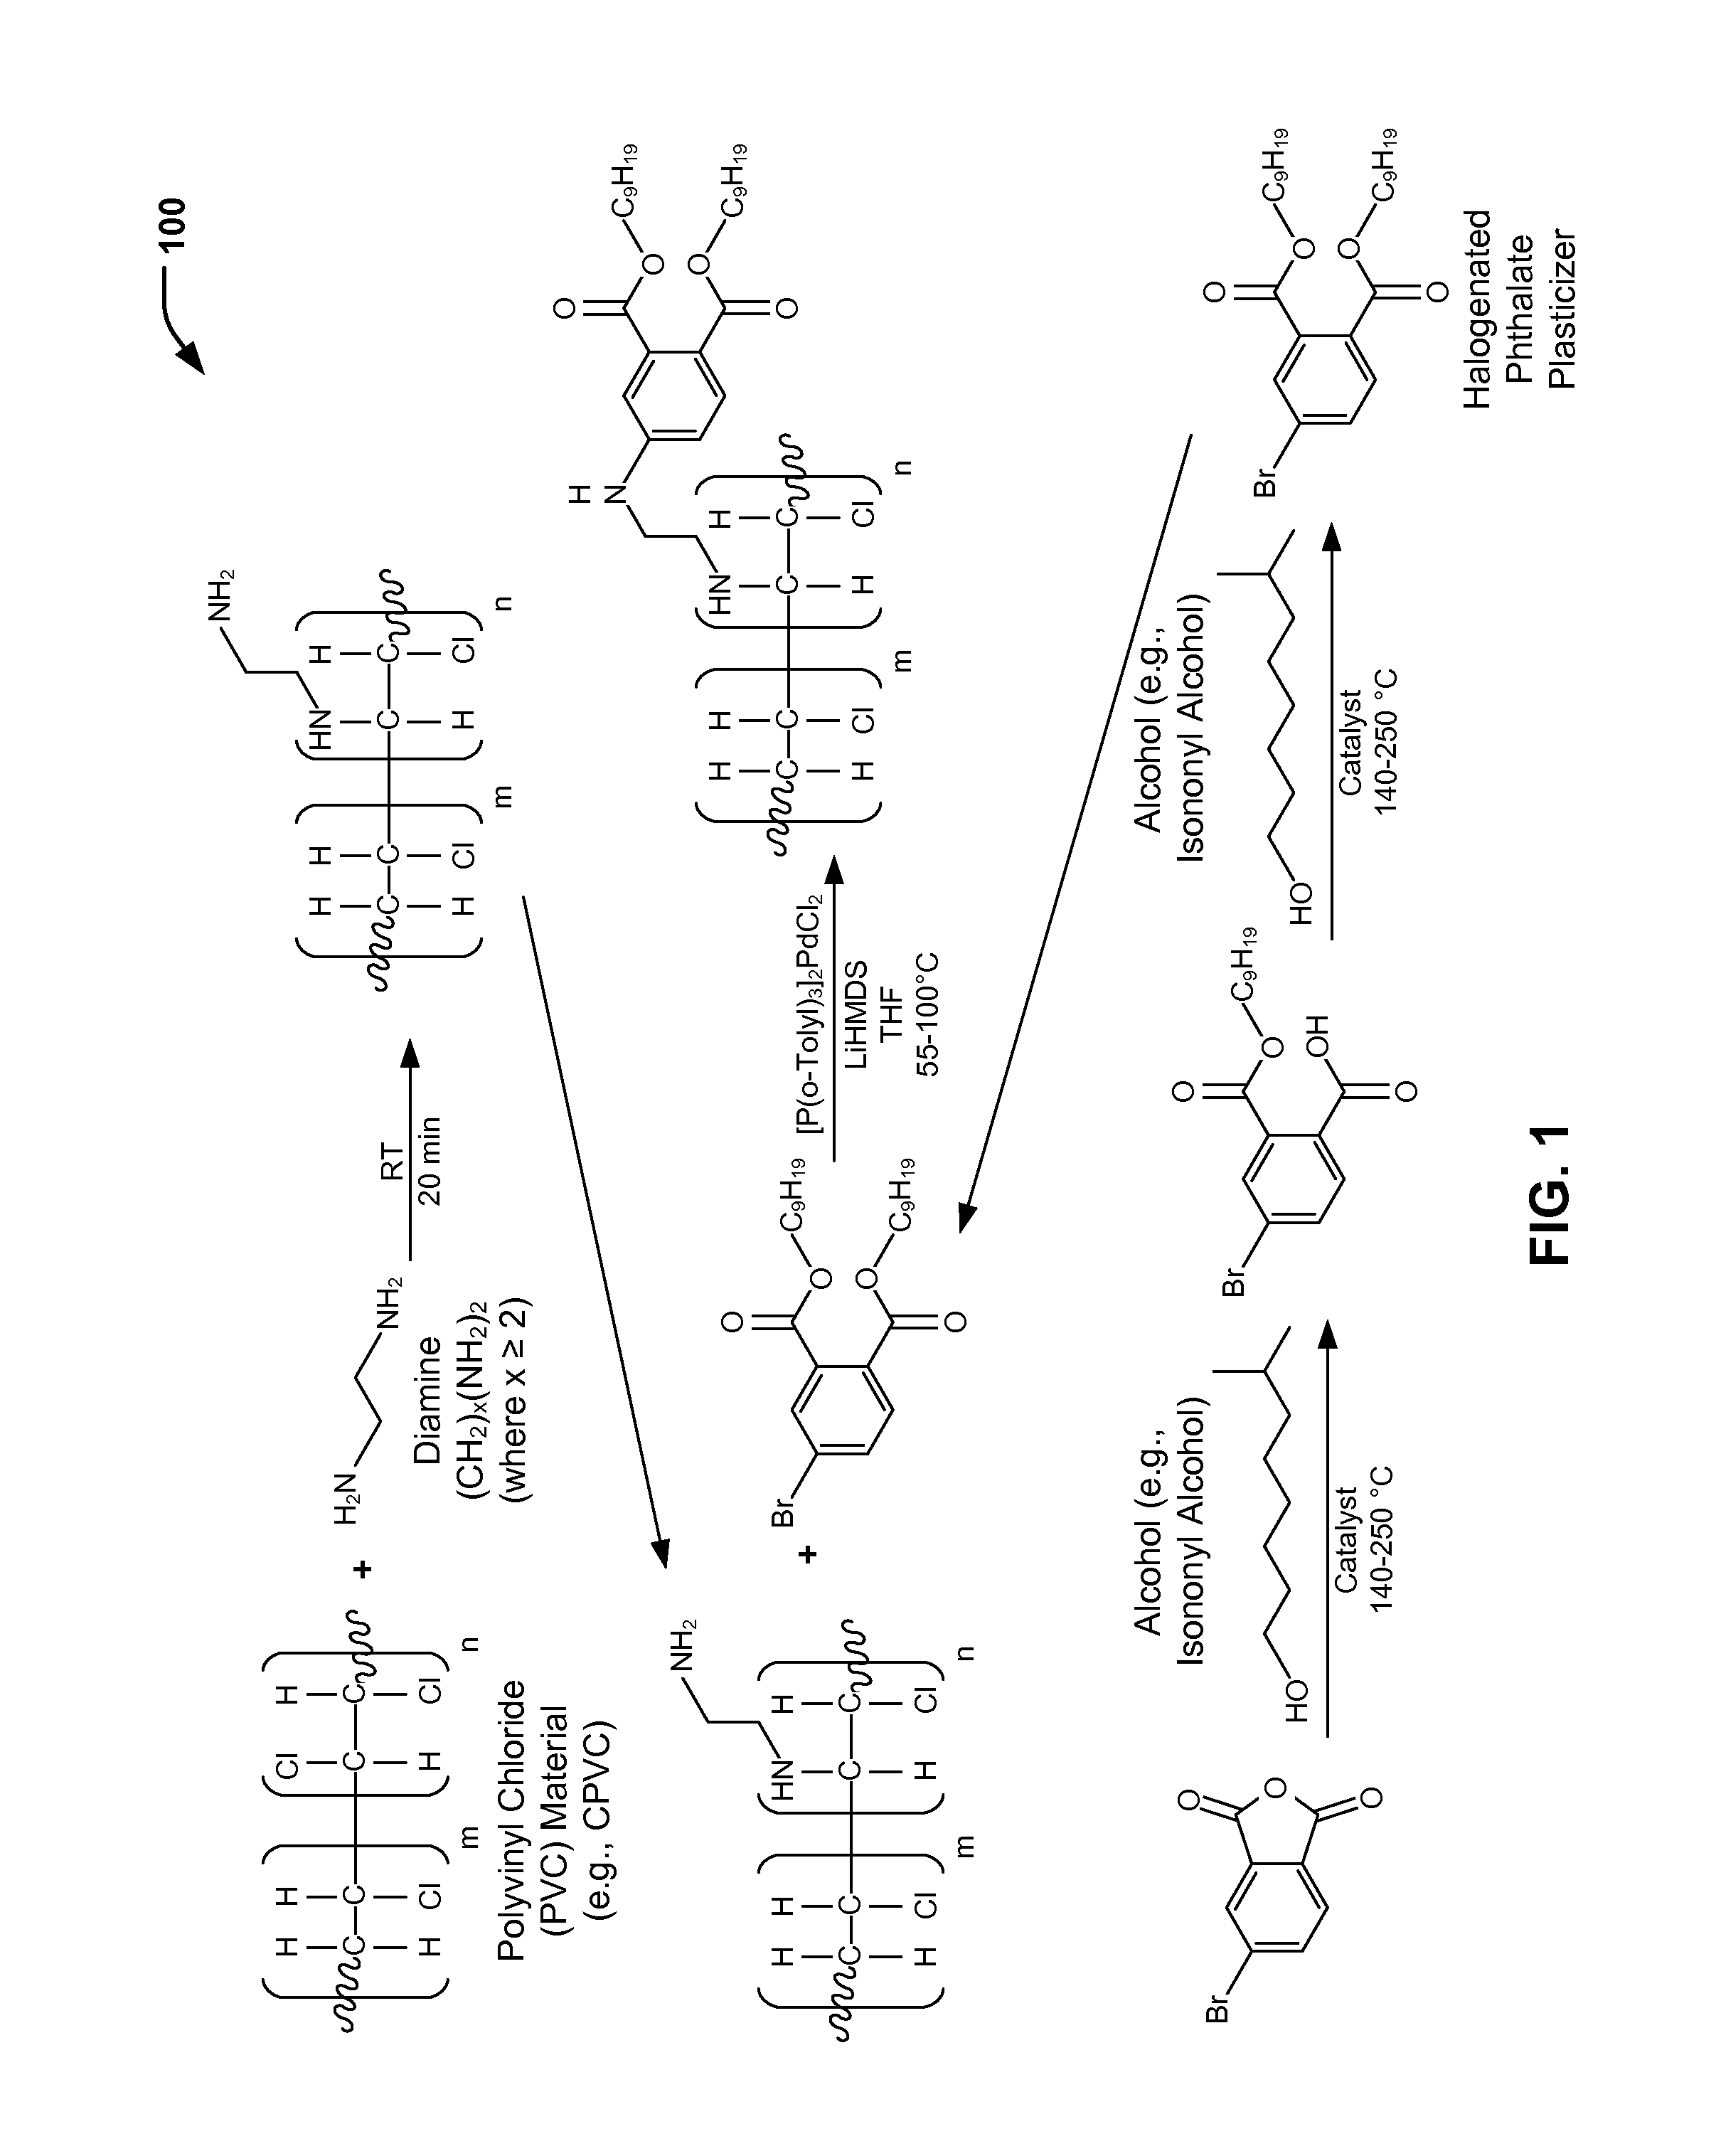 Polymeric materials having phthalate plasticizers covalently bonded to a polymer chain